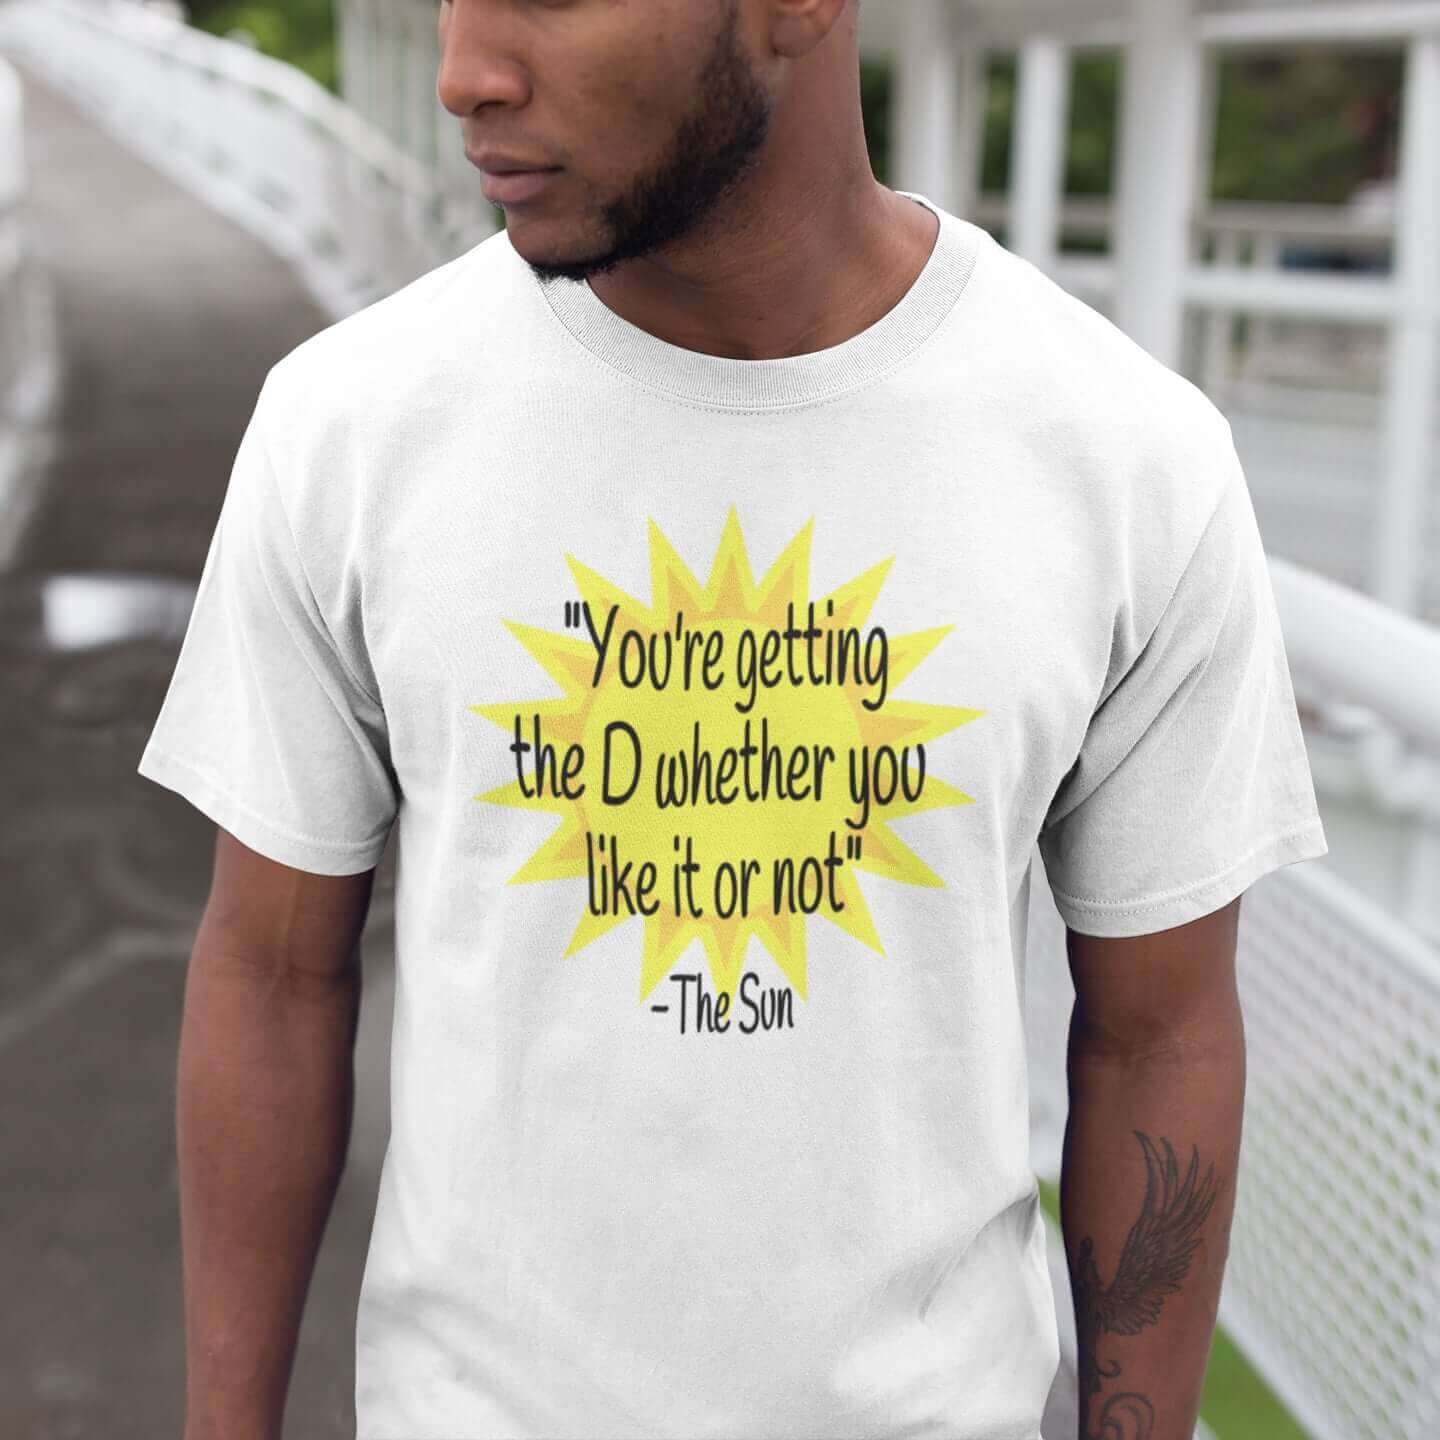 Man wearing a white t-shirt with image of the sun and the quote You're getting the D whether you like it or not printed on the front.